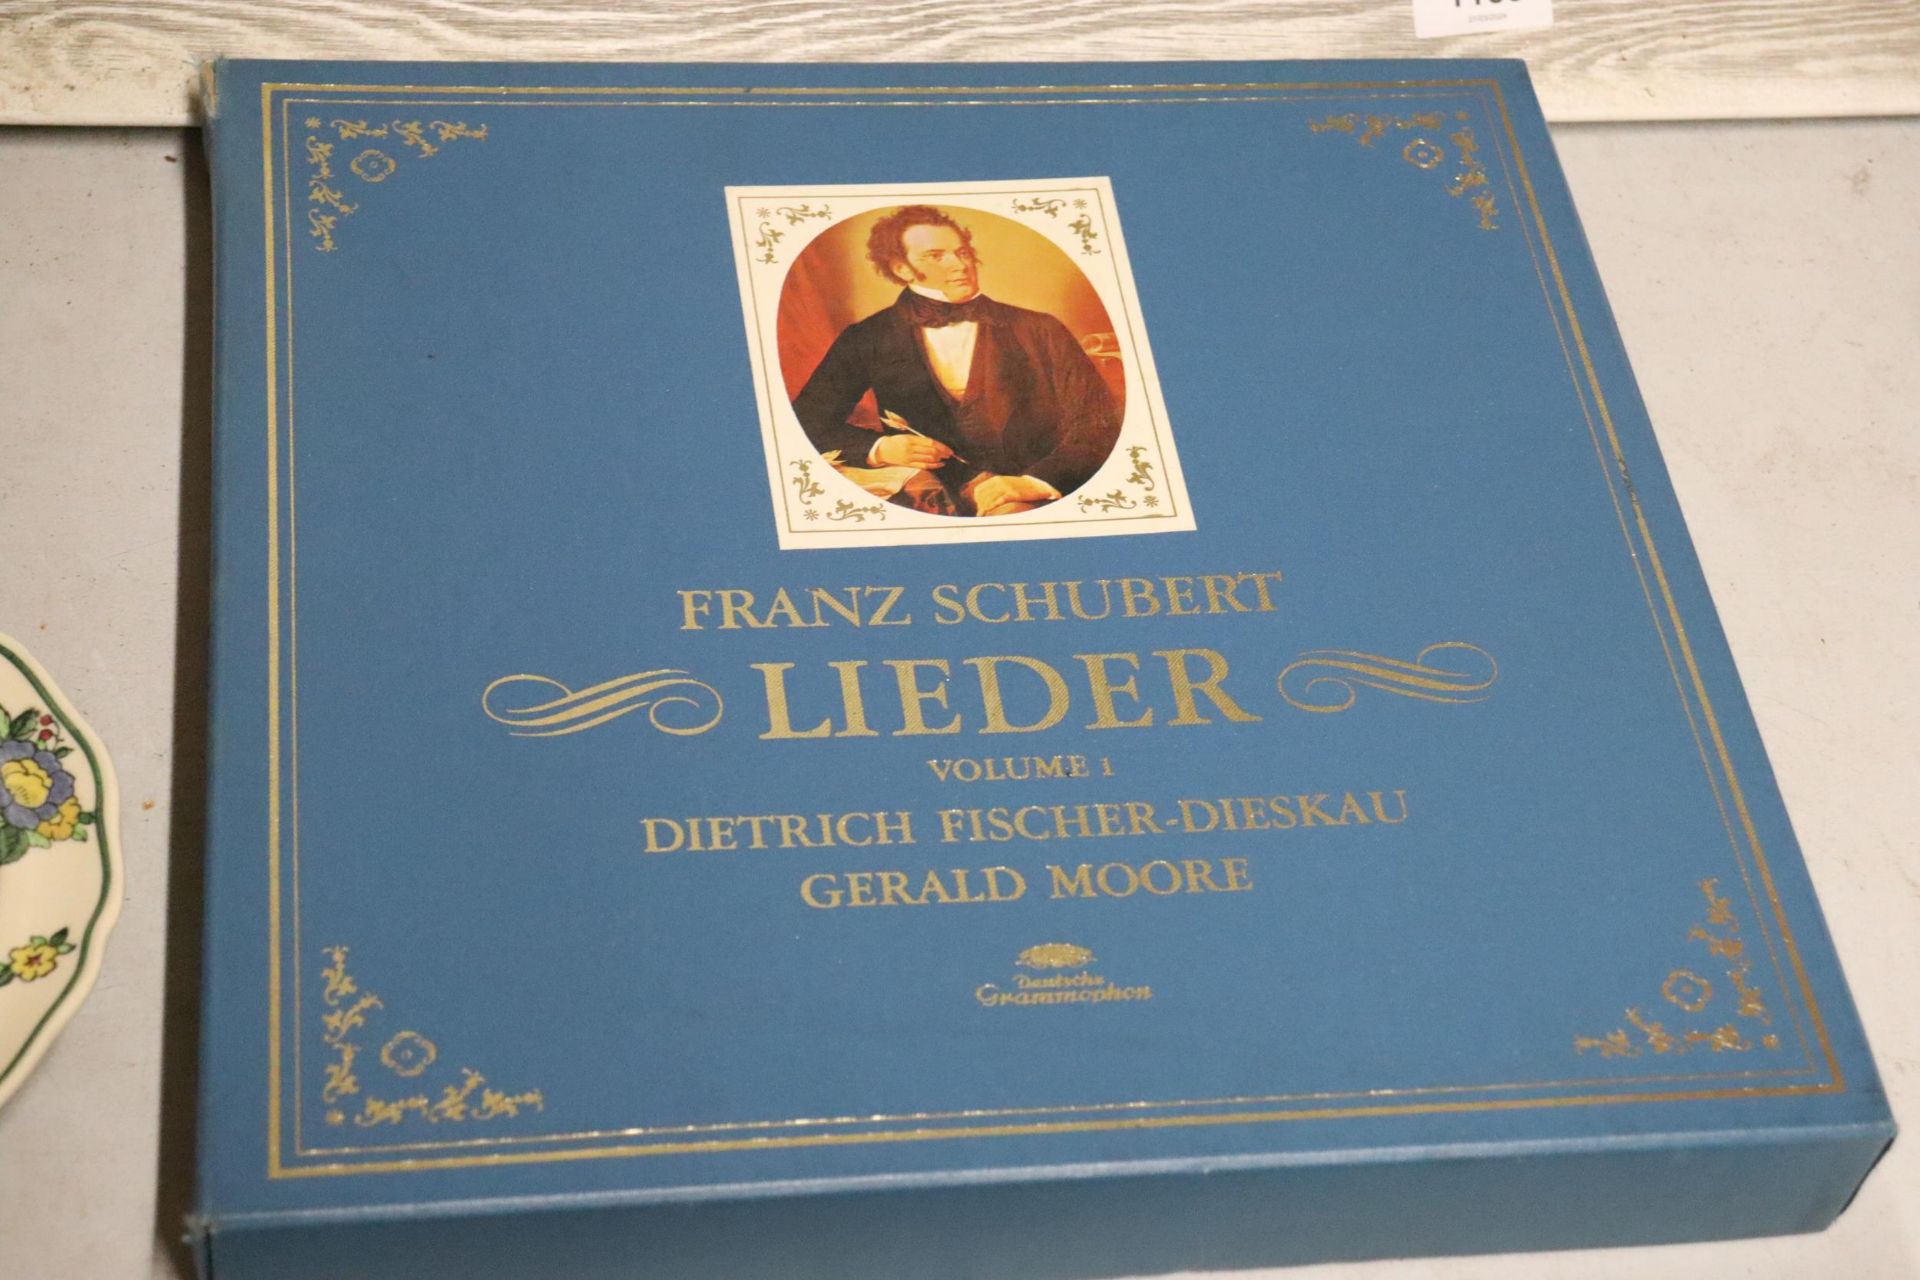 A COLLECTION OF CLASSICAL BOXED VINYL LPS TO INCLUDE BEETHOVEN EDITION, ANTONIO VIVALDI, FRANZ - Image 7 of 7